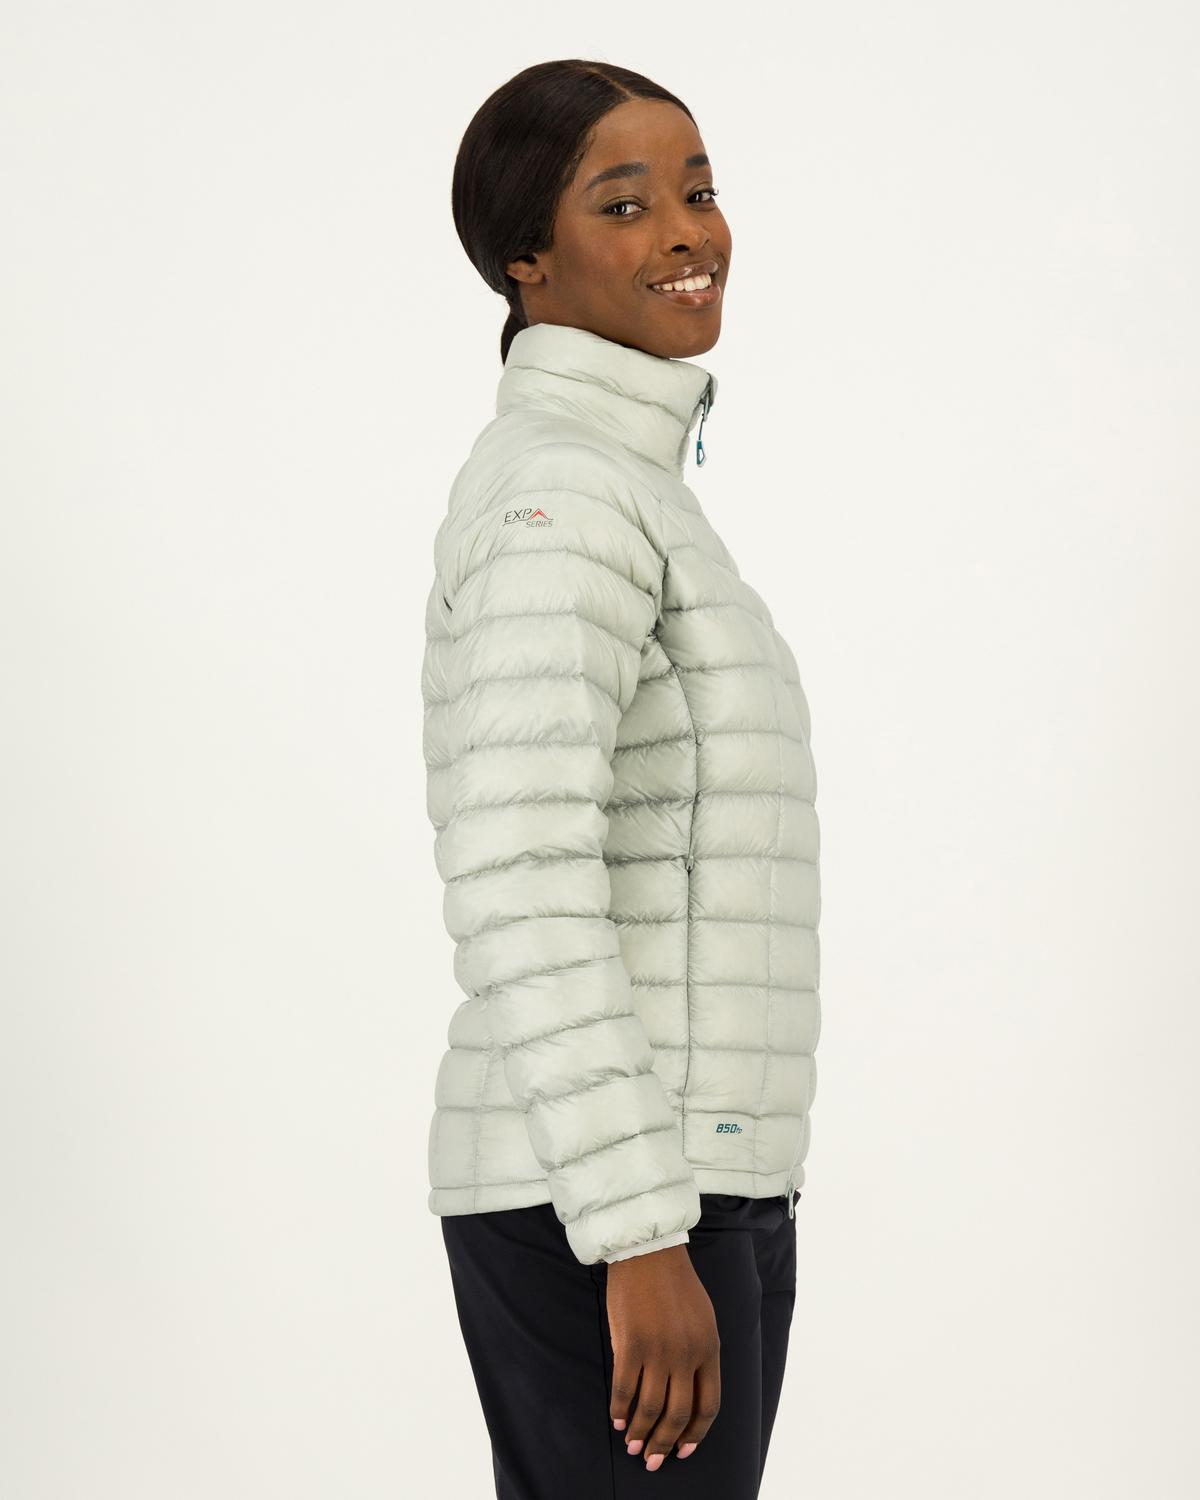 K-Way Expedition Series Women's Helena Down Jacket -  Silver